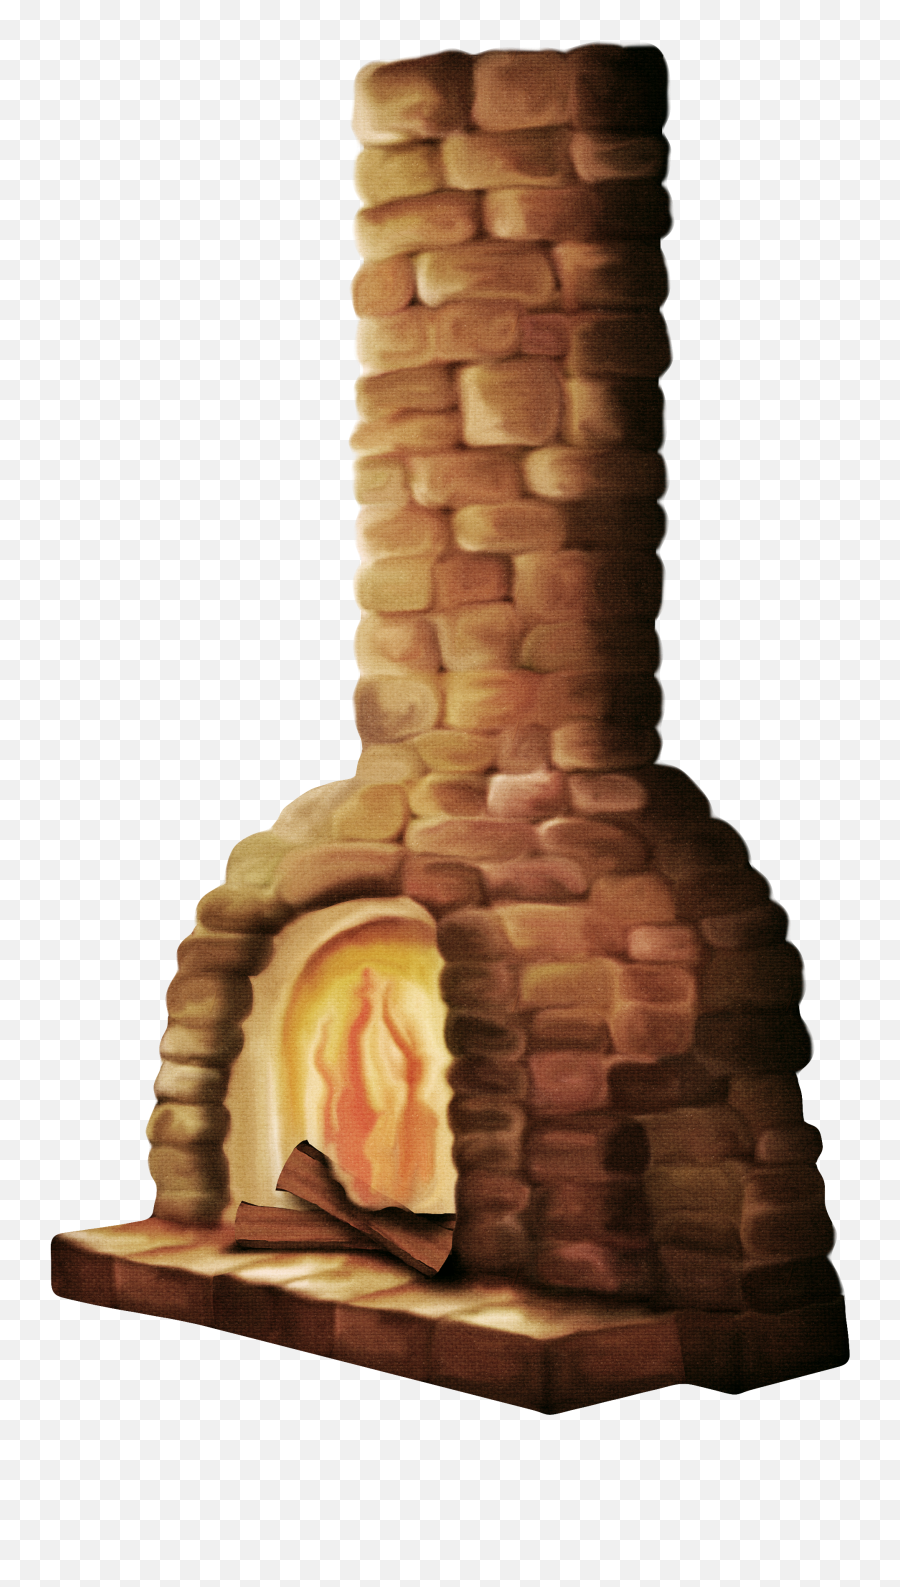 Png Images Chimney 19png Snipstock - Chocolate,Chimney Png